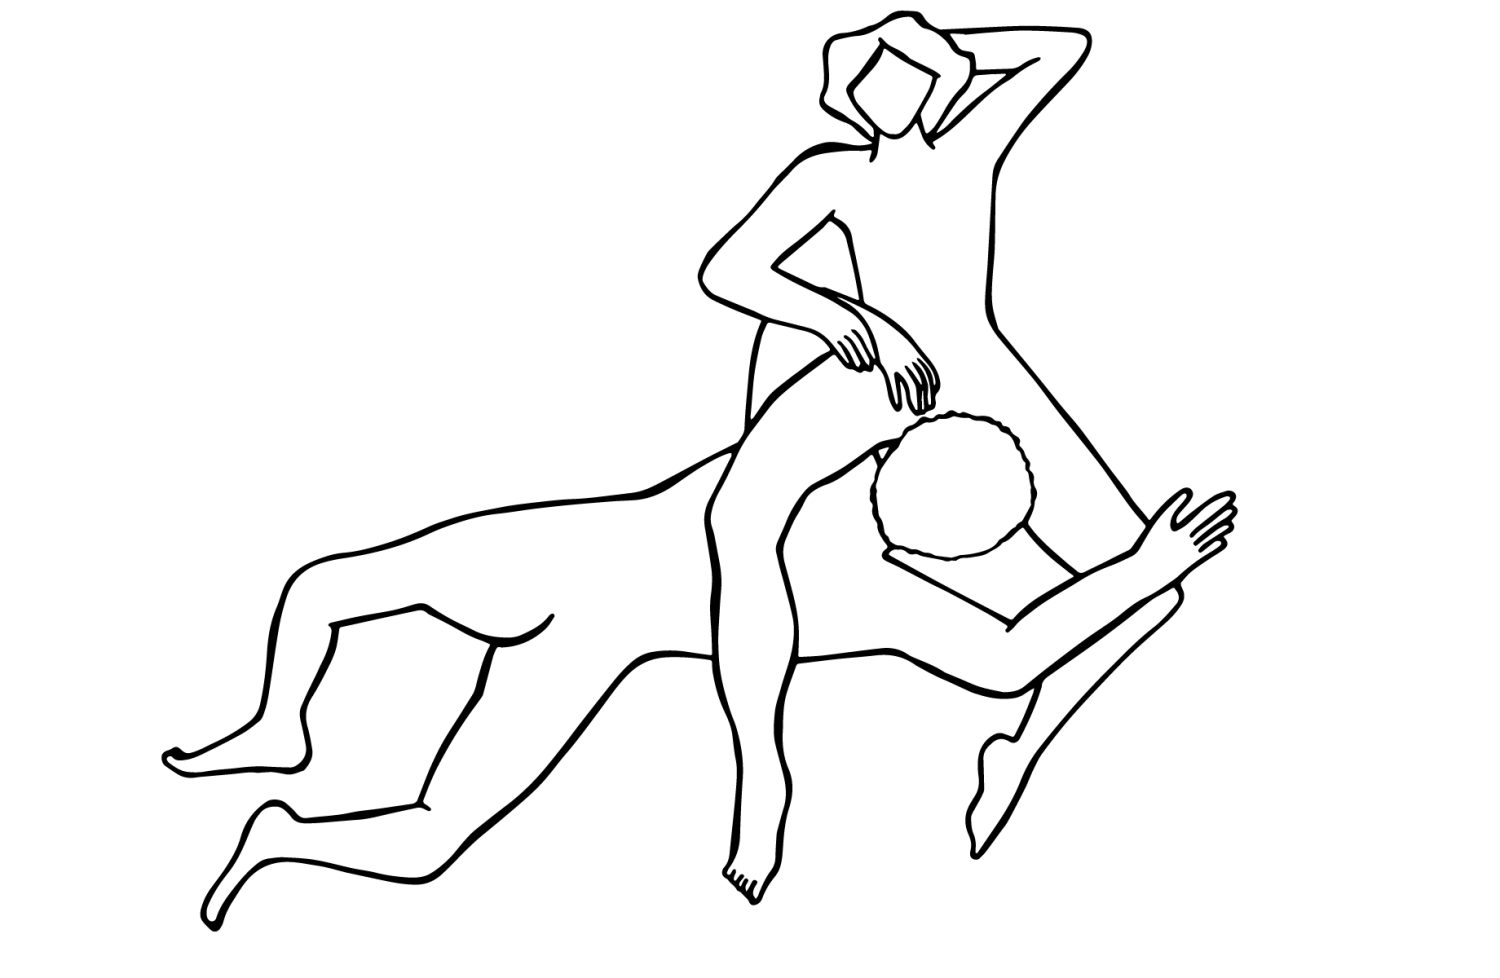 illustration of the Kivin Method from "Smart Sex" by Dr. Emily Morse